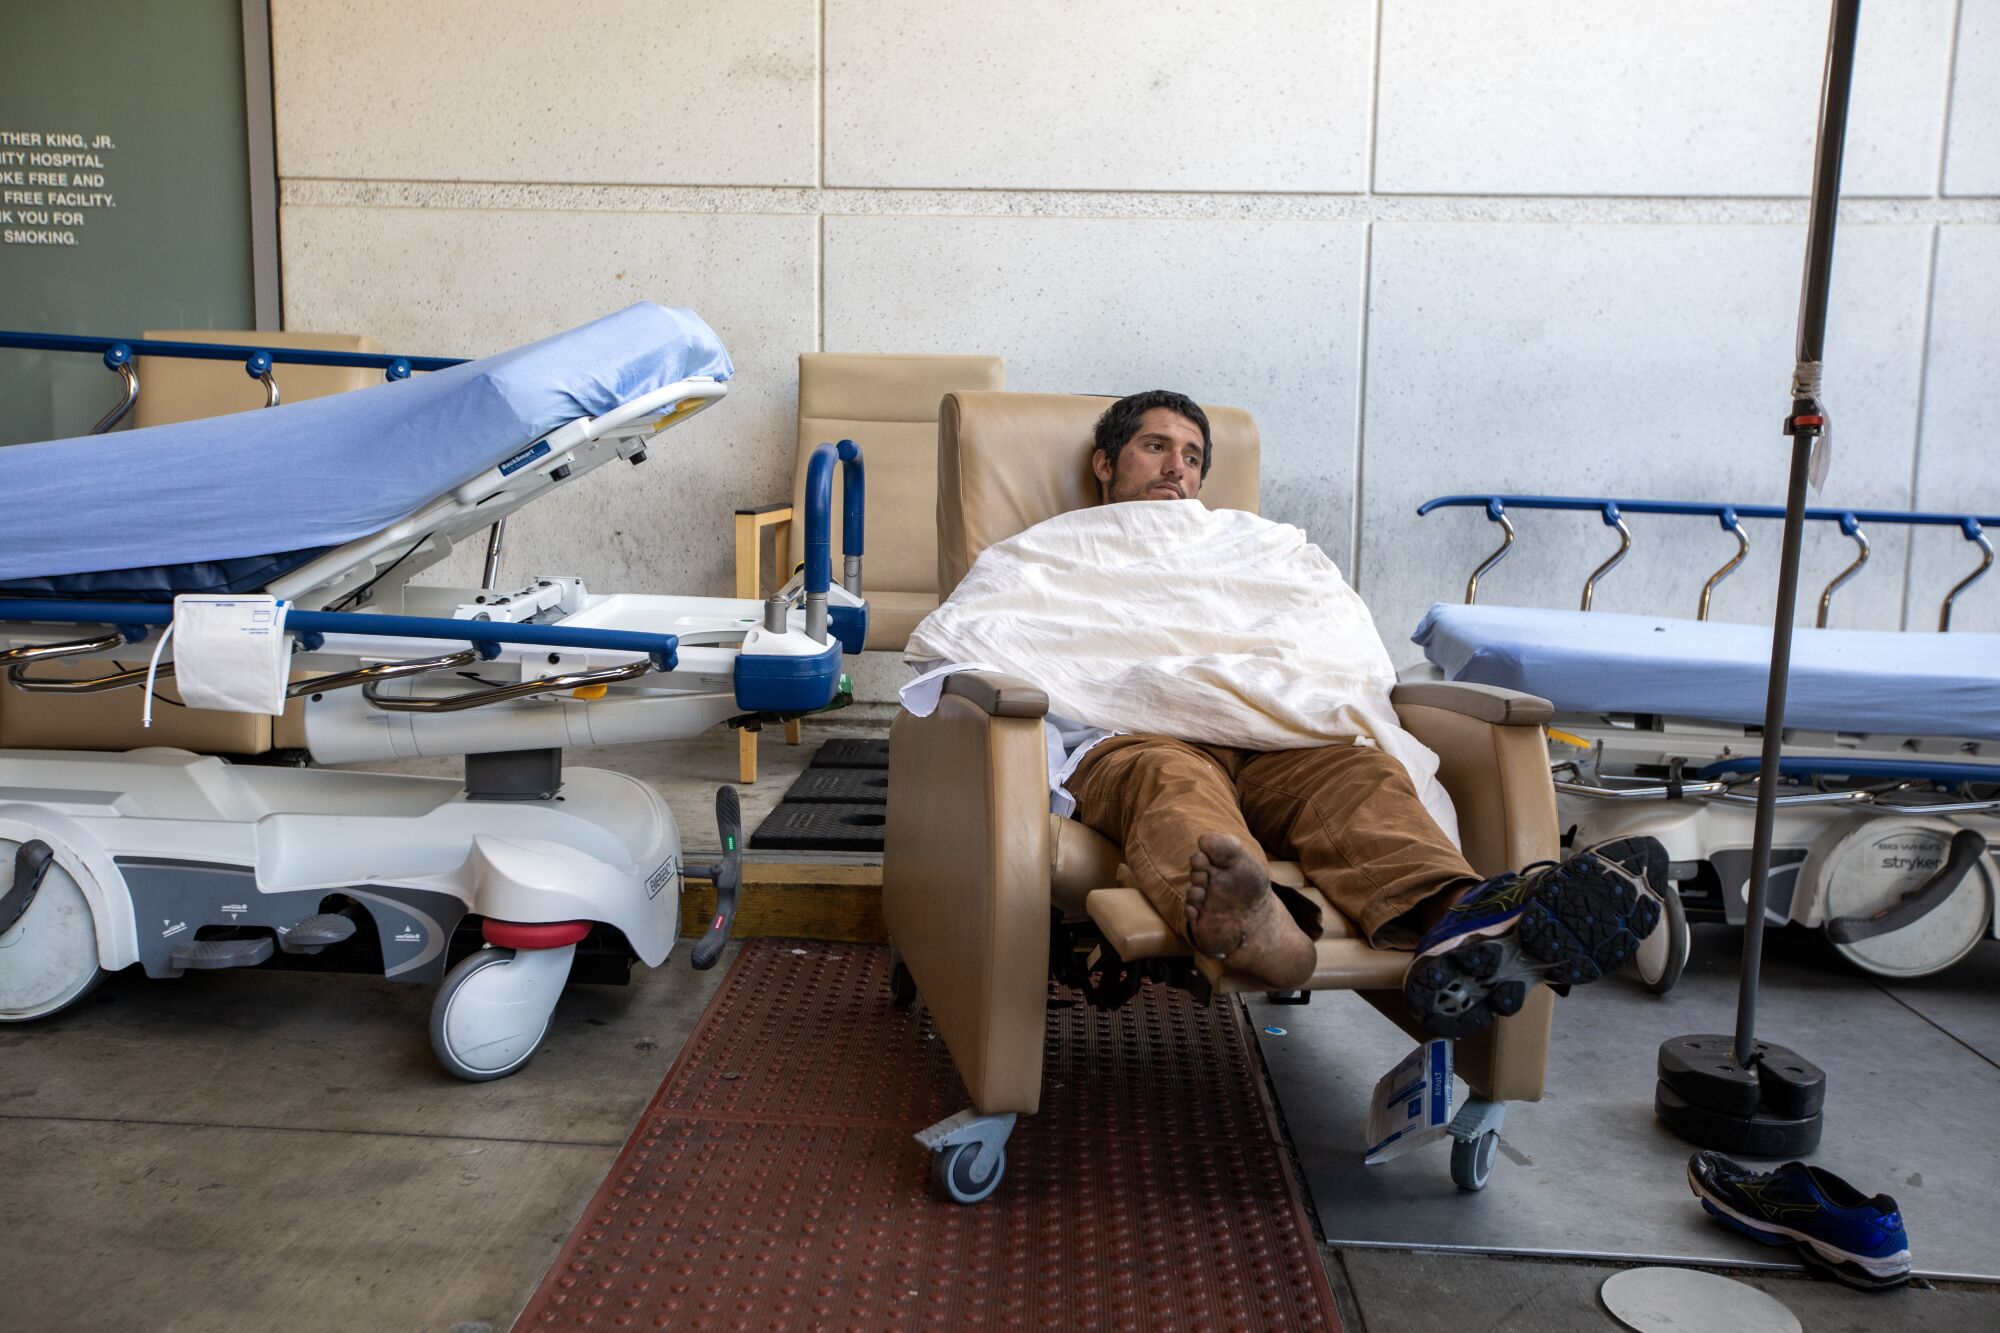 A man in one shoe sits under a blanket between empty hospital beds